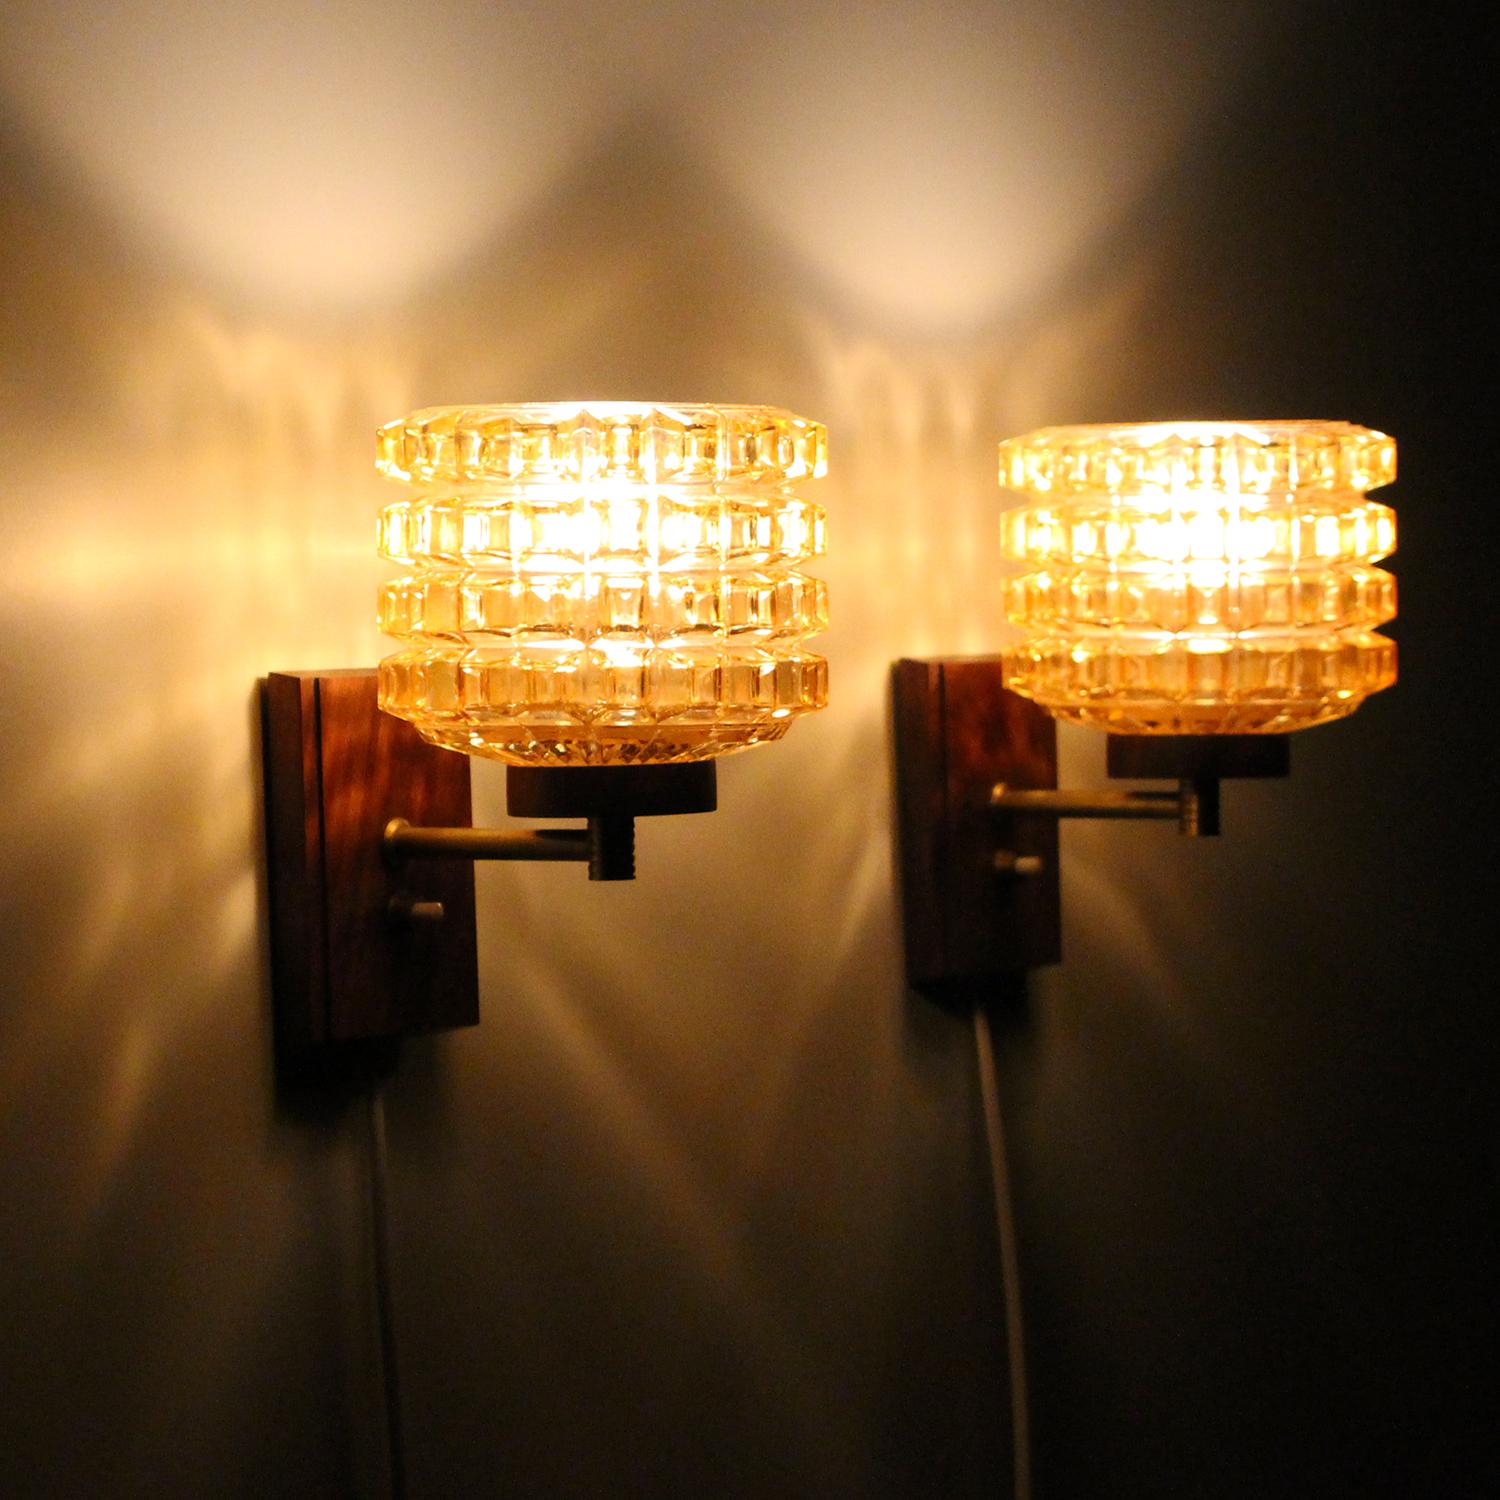 Pressed glass and rosewood wall lamps, 1950s Scandinavian midcentury wall lights with amber glass, brass and rosewood in very good vintage condition.

This beautiful pair of wall lights, each made up of a thick pressed glass shade, a brass arm and a